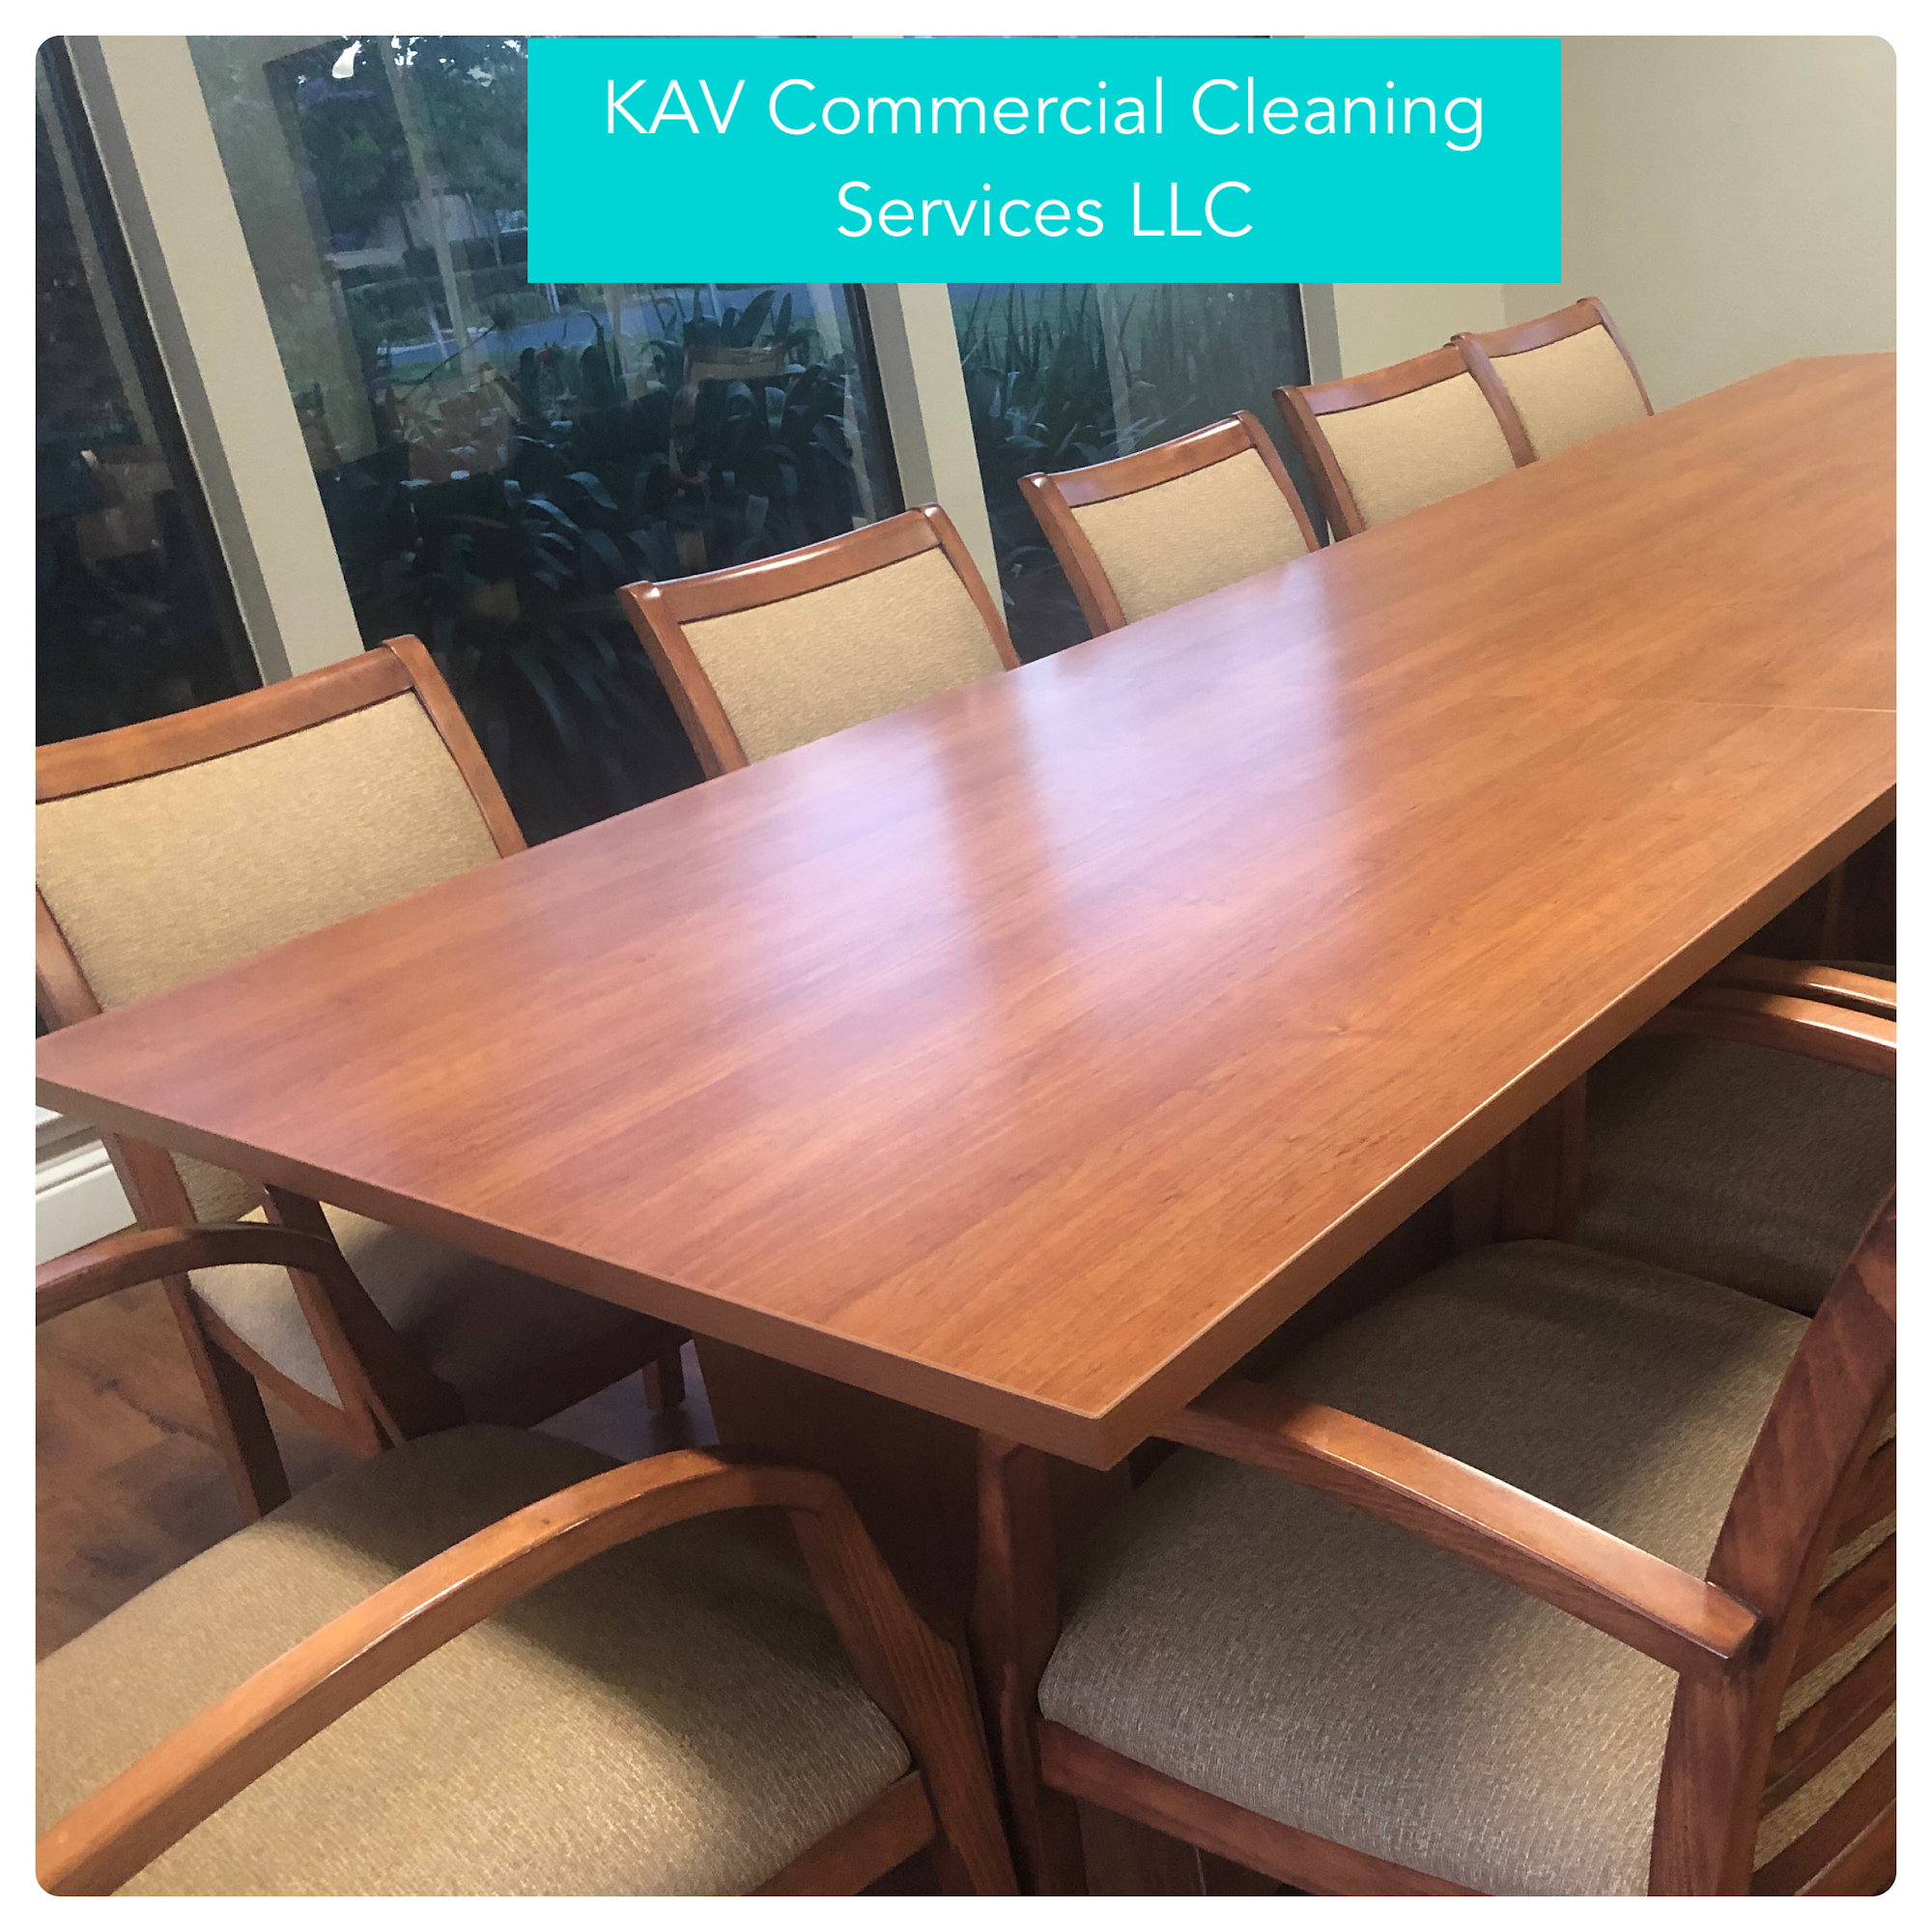 KAV Commercial Cleaning Services LLC